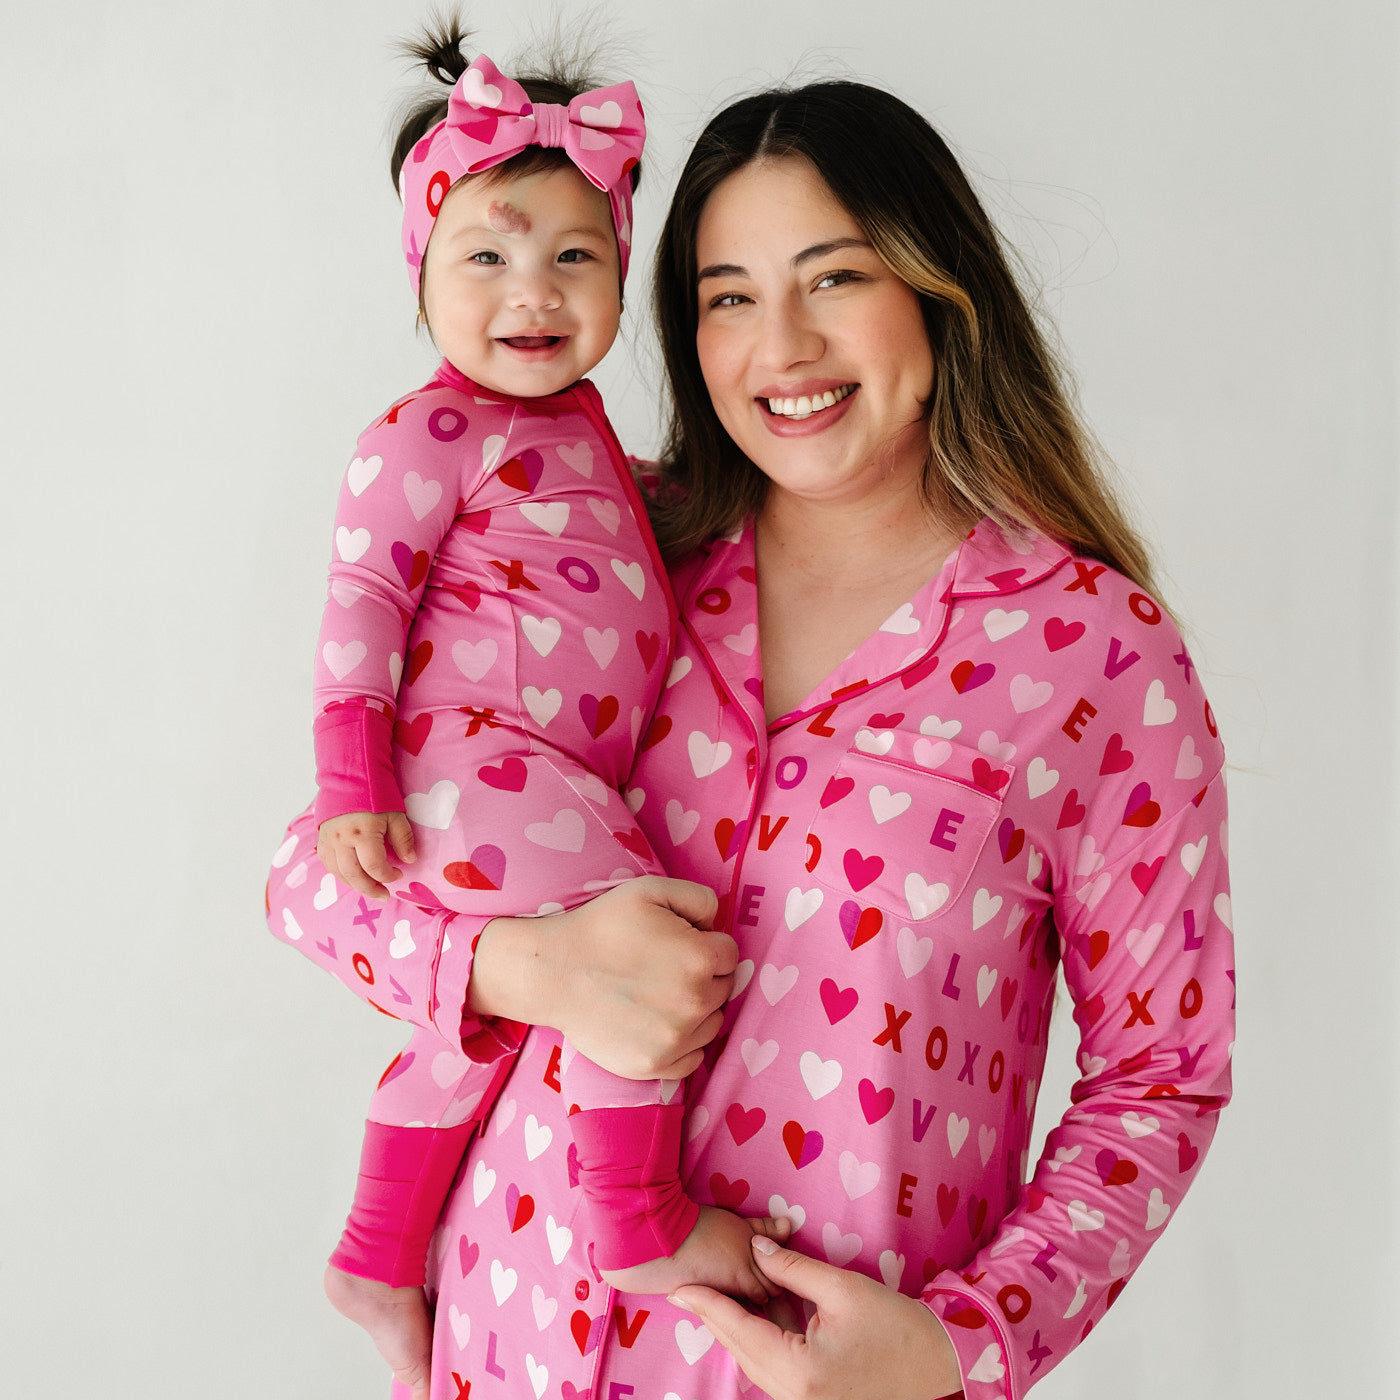 Mom holding her child wearing matching Pink XOXO pajamas. Child is wearing a Pink XOXO zippy paired with a matching luxe bow headband. Mom is wearing a women's Pink XOXO long sleeve sleep shirt